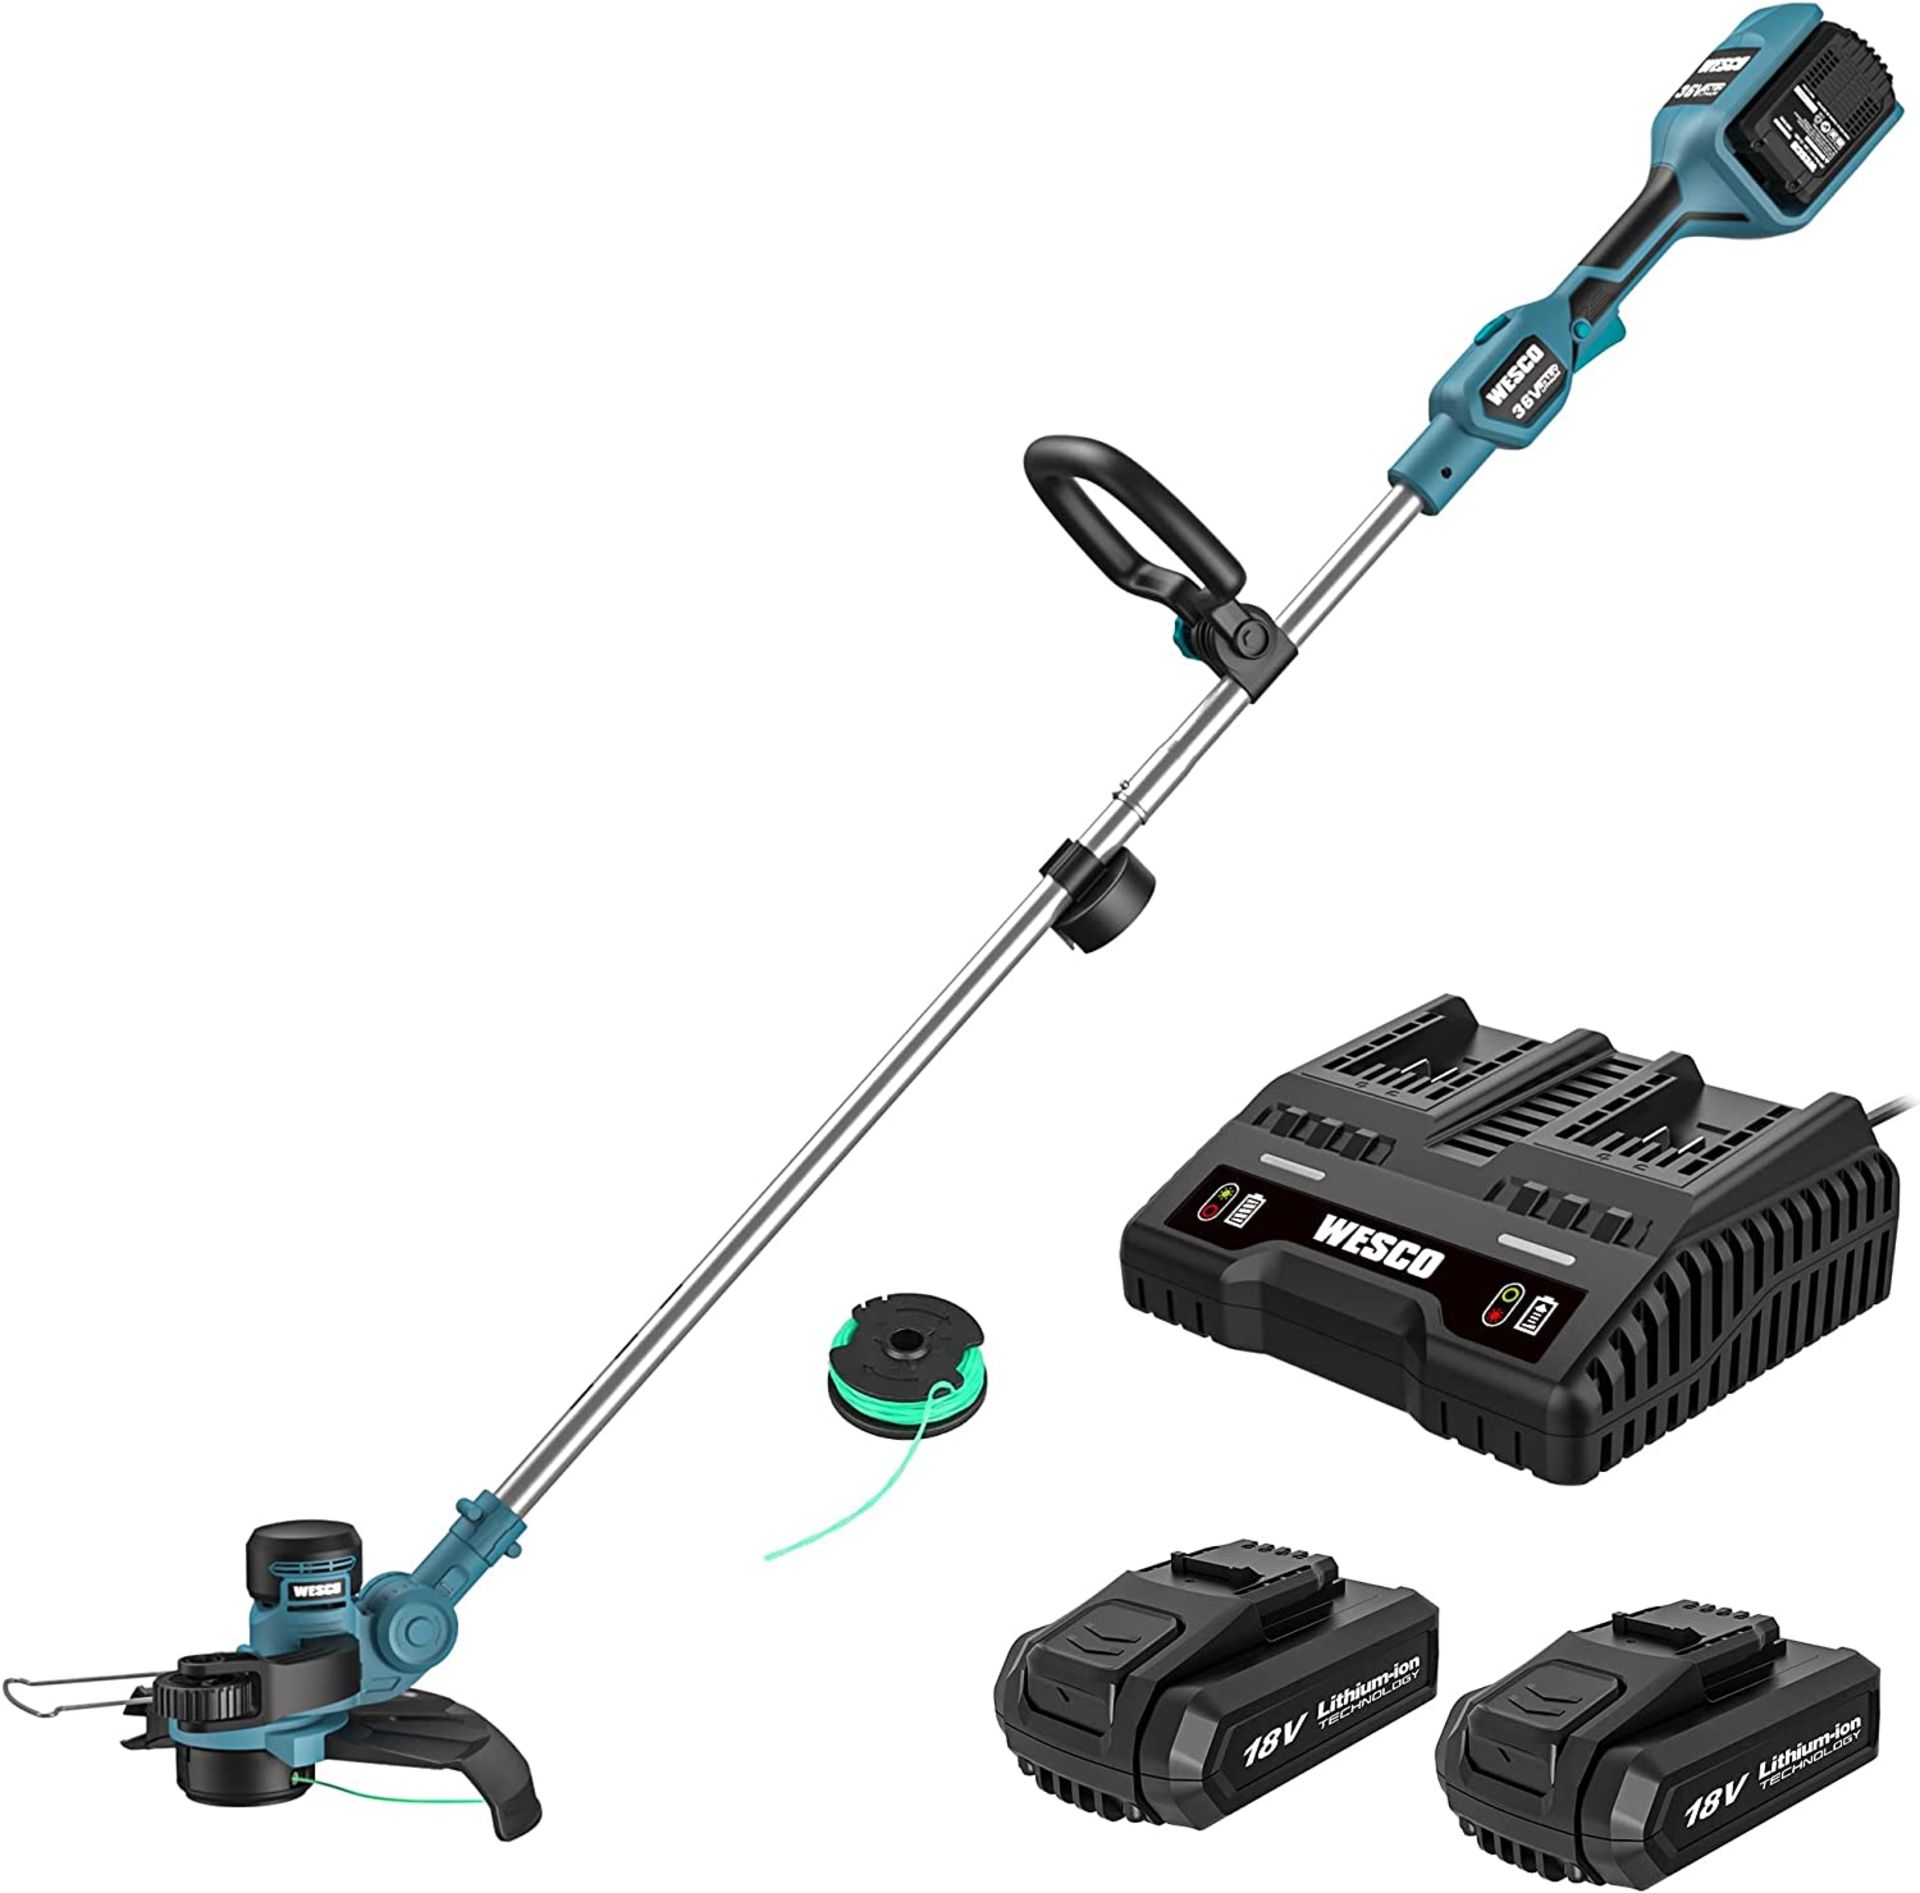 TRADE LOT 6 x New & Boxed Wesco Cordless Grass Trimmer 36V, WESCO 2-in-1 strimmer cordless with 2x